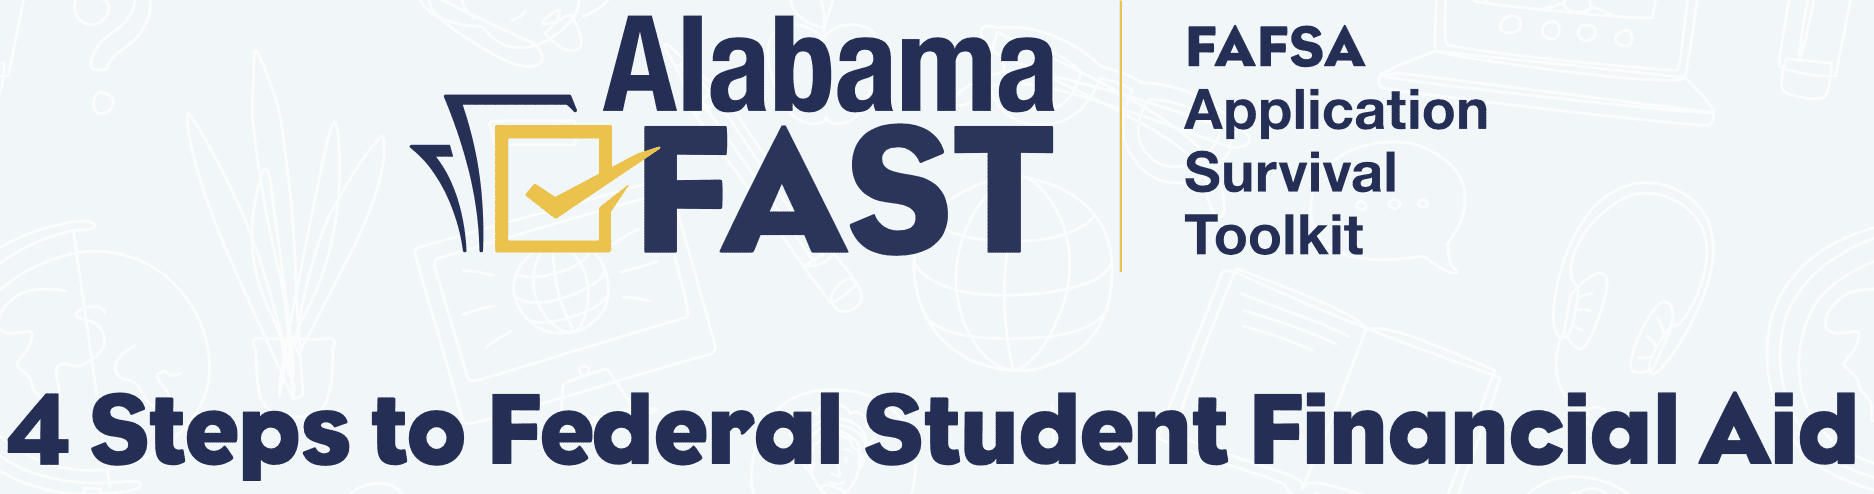 Alabama FAST: FAFSA Application Survival Toolkit 4 Steps to Federal Student Financial Aid